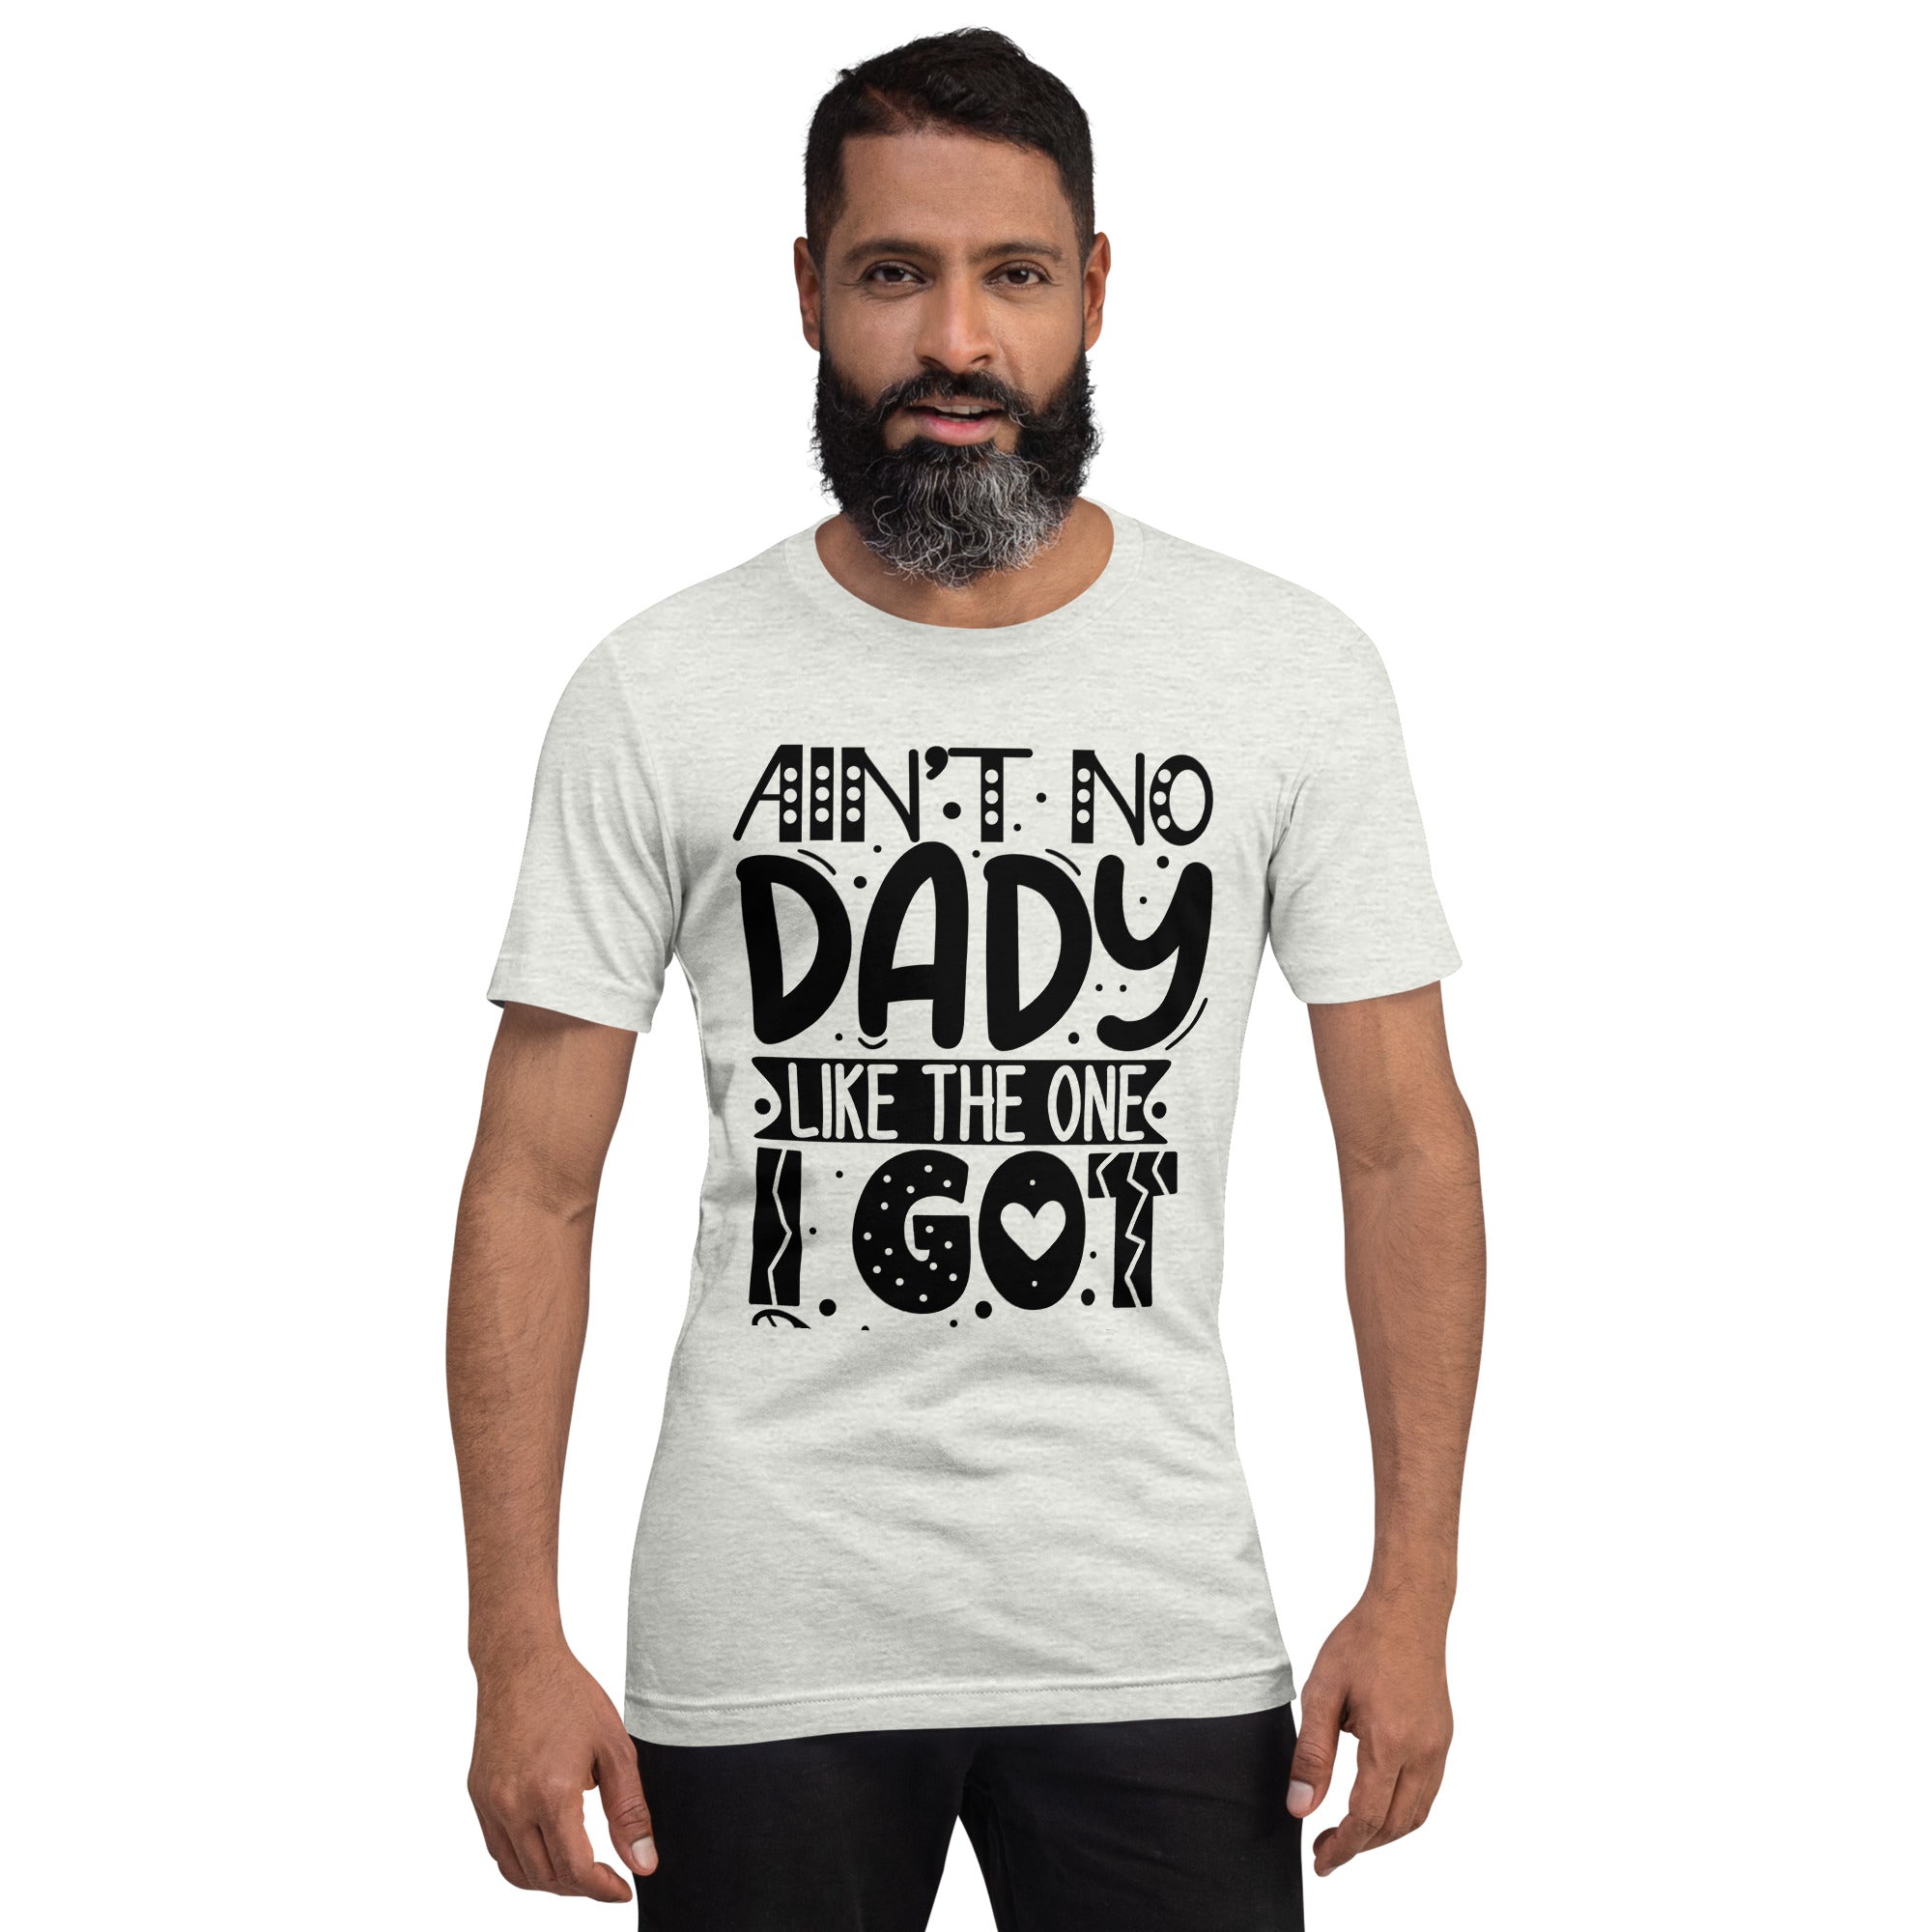 Unisex t-shirt, Dad's T shirt, father's day t shirt gift for dad